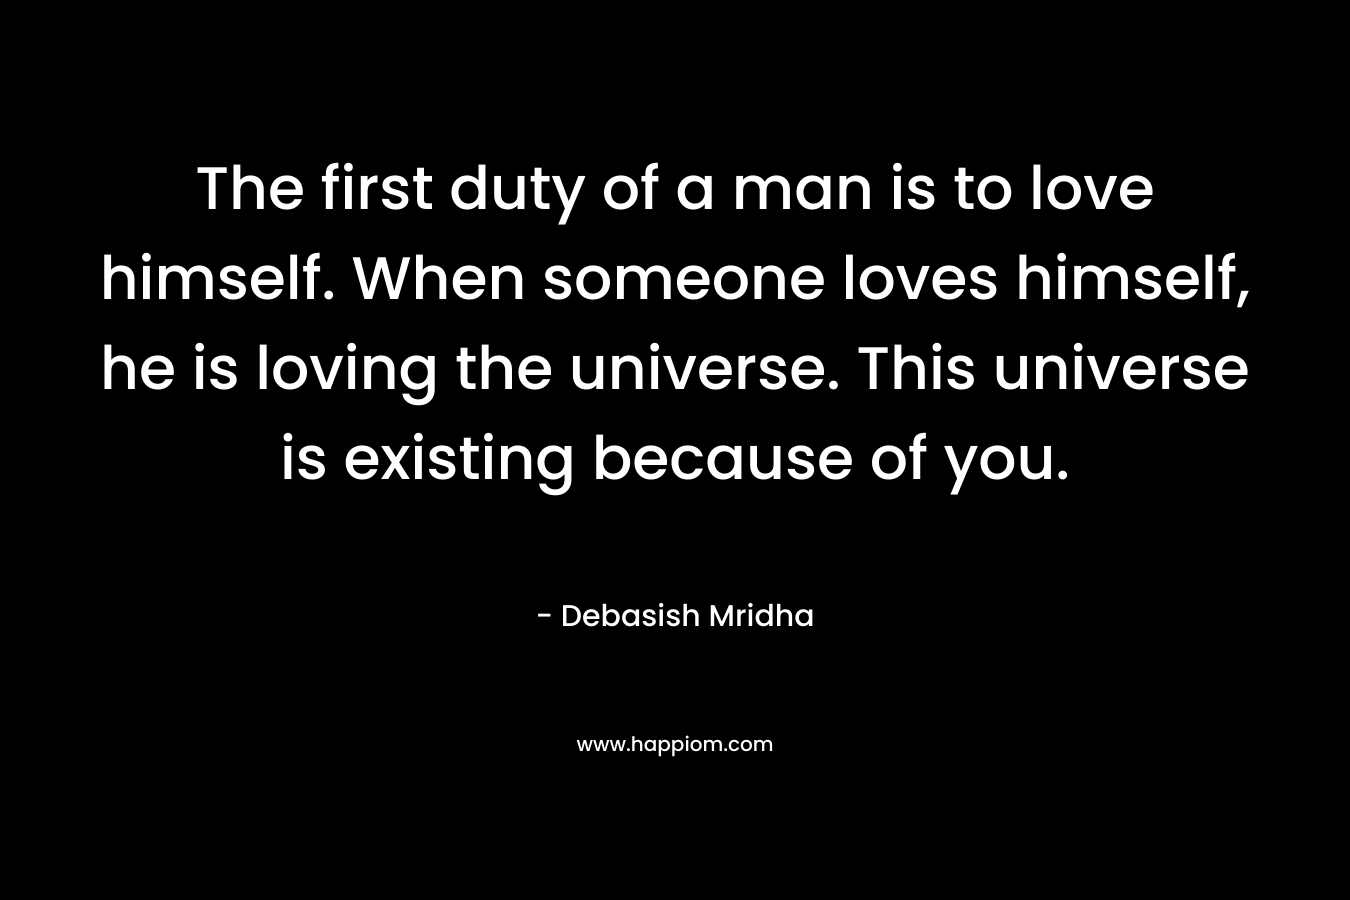 The first duty of a man is to love himself. When someone loves himself, he is loving the universe. This universe is existing because of you.